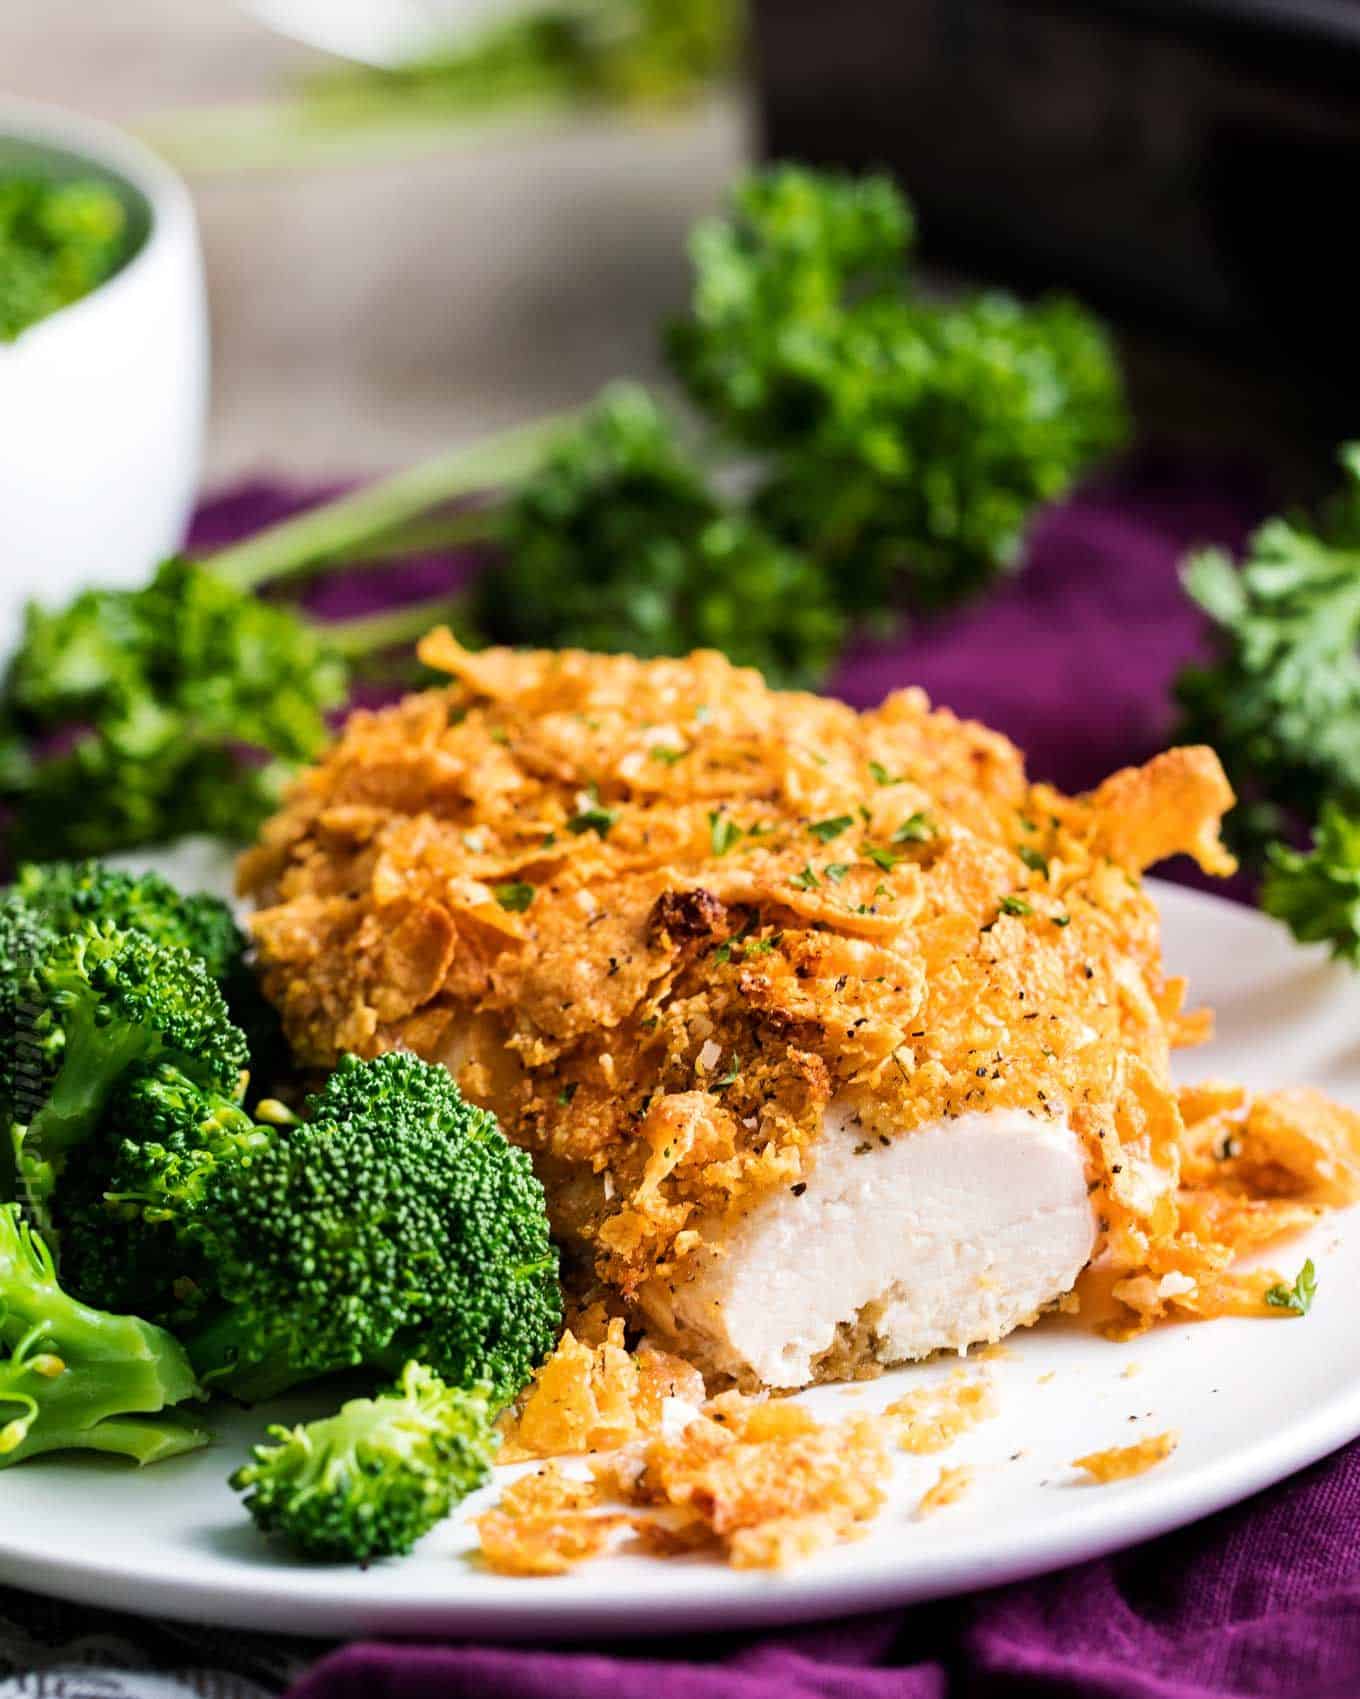 Crunchy, juicy baked chicken made by slathering chicken breasts in ...